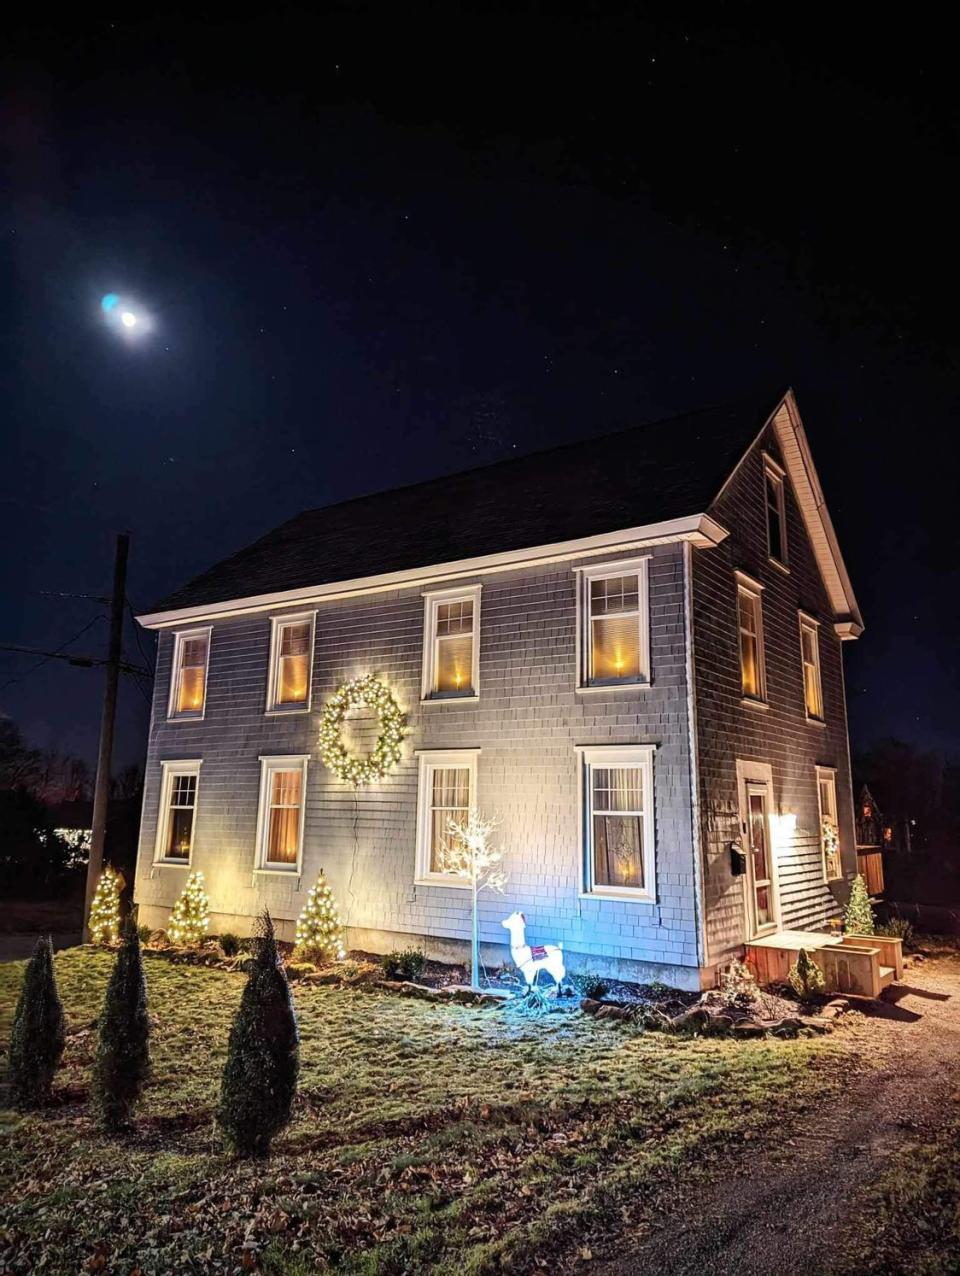 A Nova Scotian home is shown here with plug in candle lights in the windows.